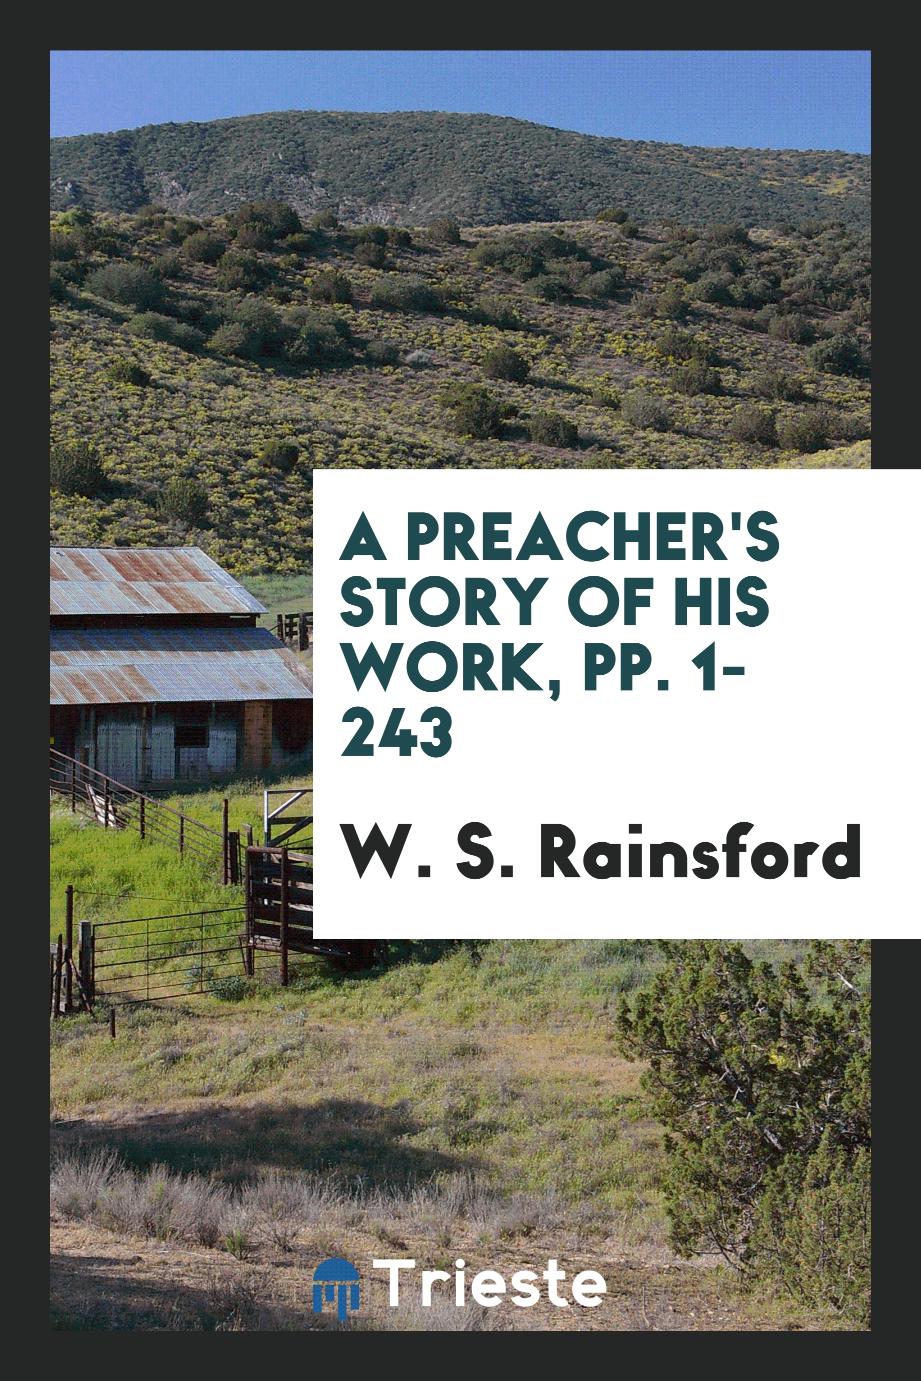 A Preacher's Story of His Work, pp. 1-243